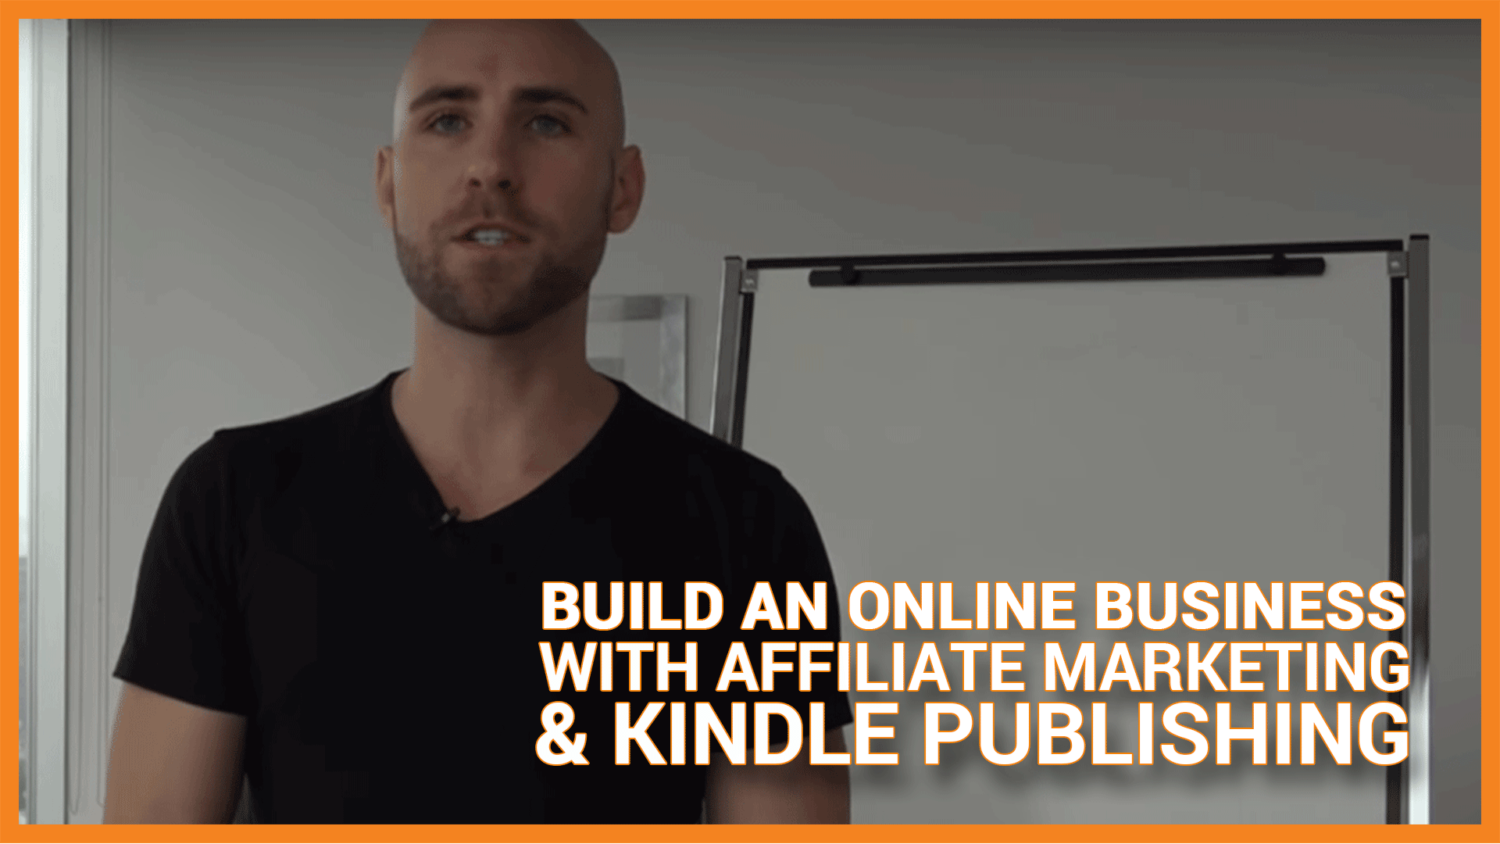 Affiliate Marketing For Beginners: What It Is + How to Succeed